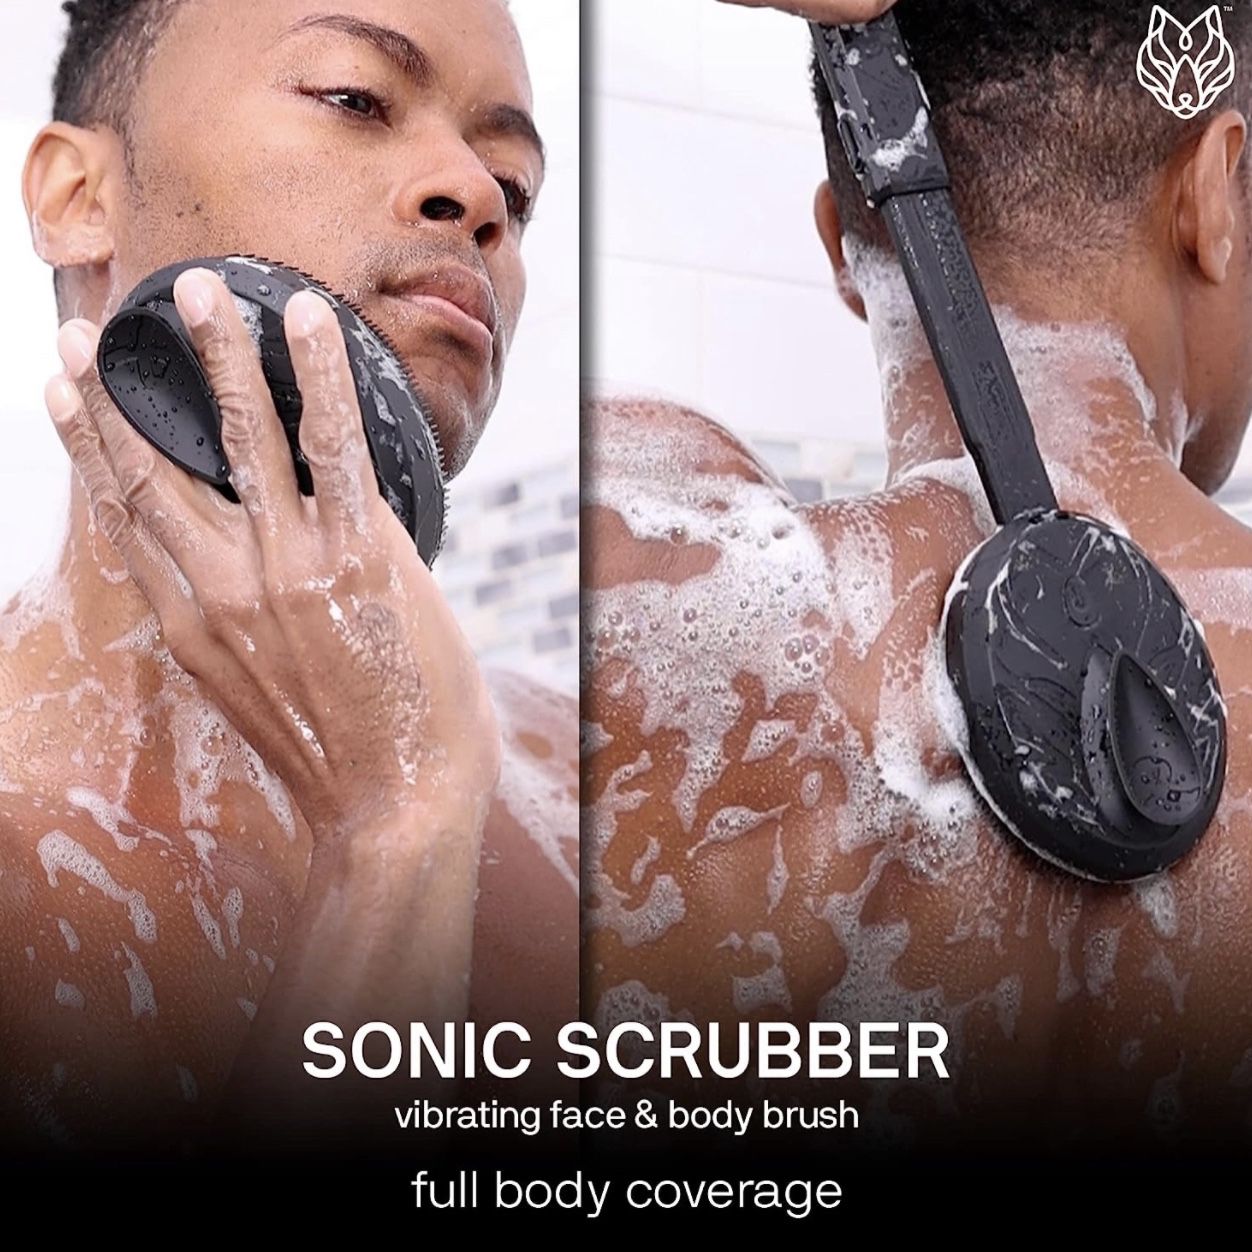 Sonic Scrubber Black Wolf Vibrating Face and Body Brush for Sale in  Pembroke Pines, FL - OfferUp